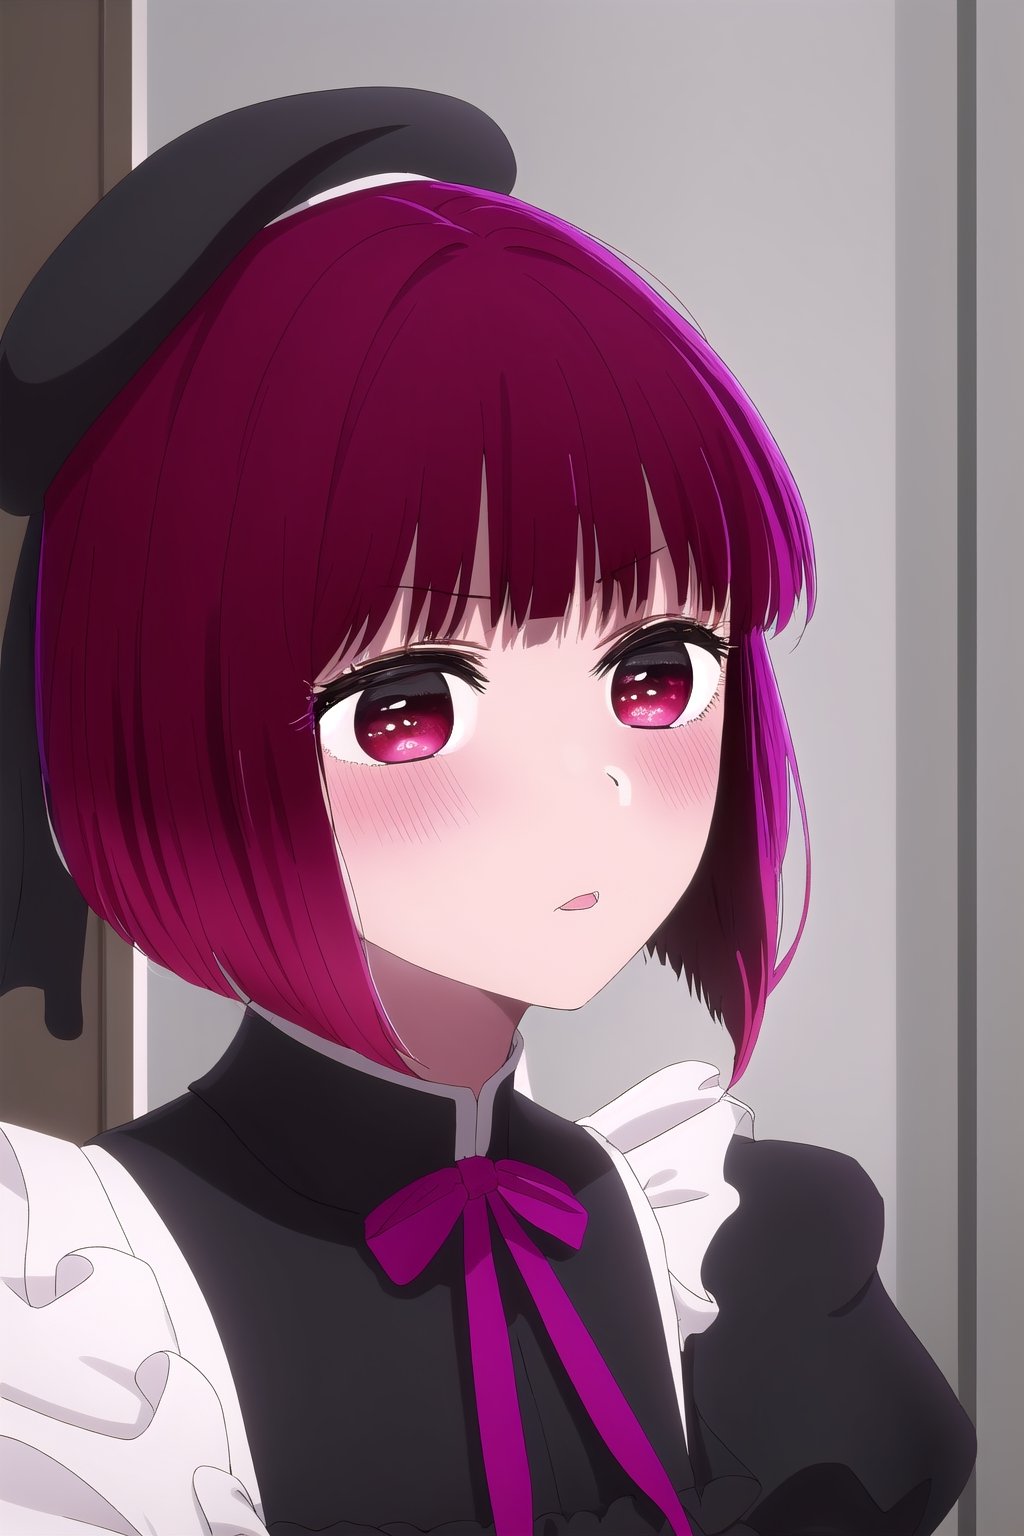 Masterpiece:1.2, Best Quality:1.2, 8k:1.2, uhd:1.2, highres:1.2, Extremely Detailed 8k Wallpaper:1.2, 1girl, solo, Short Hair, Red Hair, Blunt Bangs, Red Eyes, Detailed pupils, Seductive Face, Blush, Ultra Details, Black Beret, Victorian Dress, Black Dress,GothicC